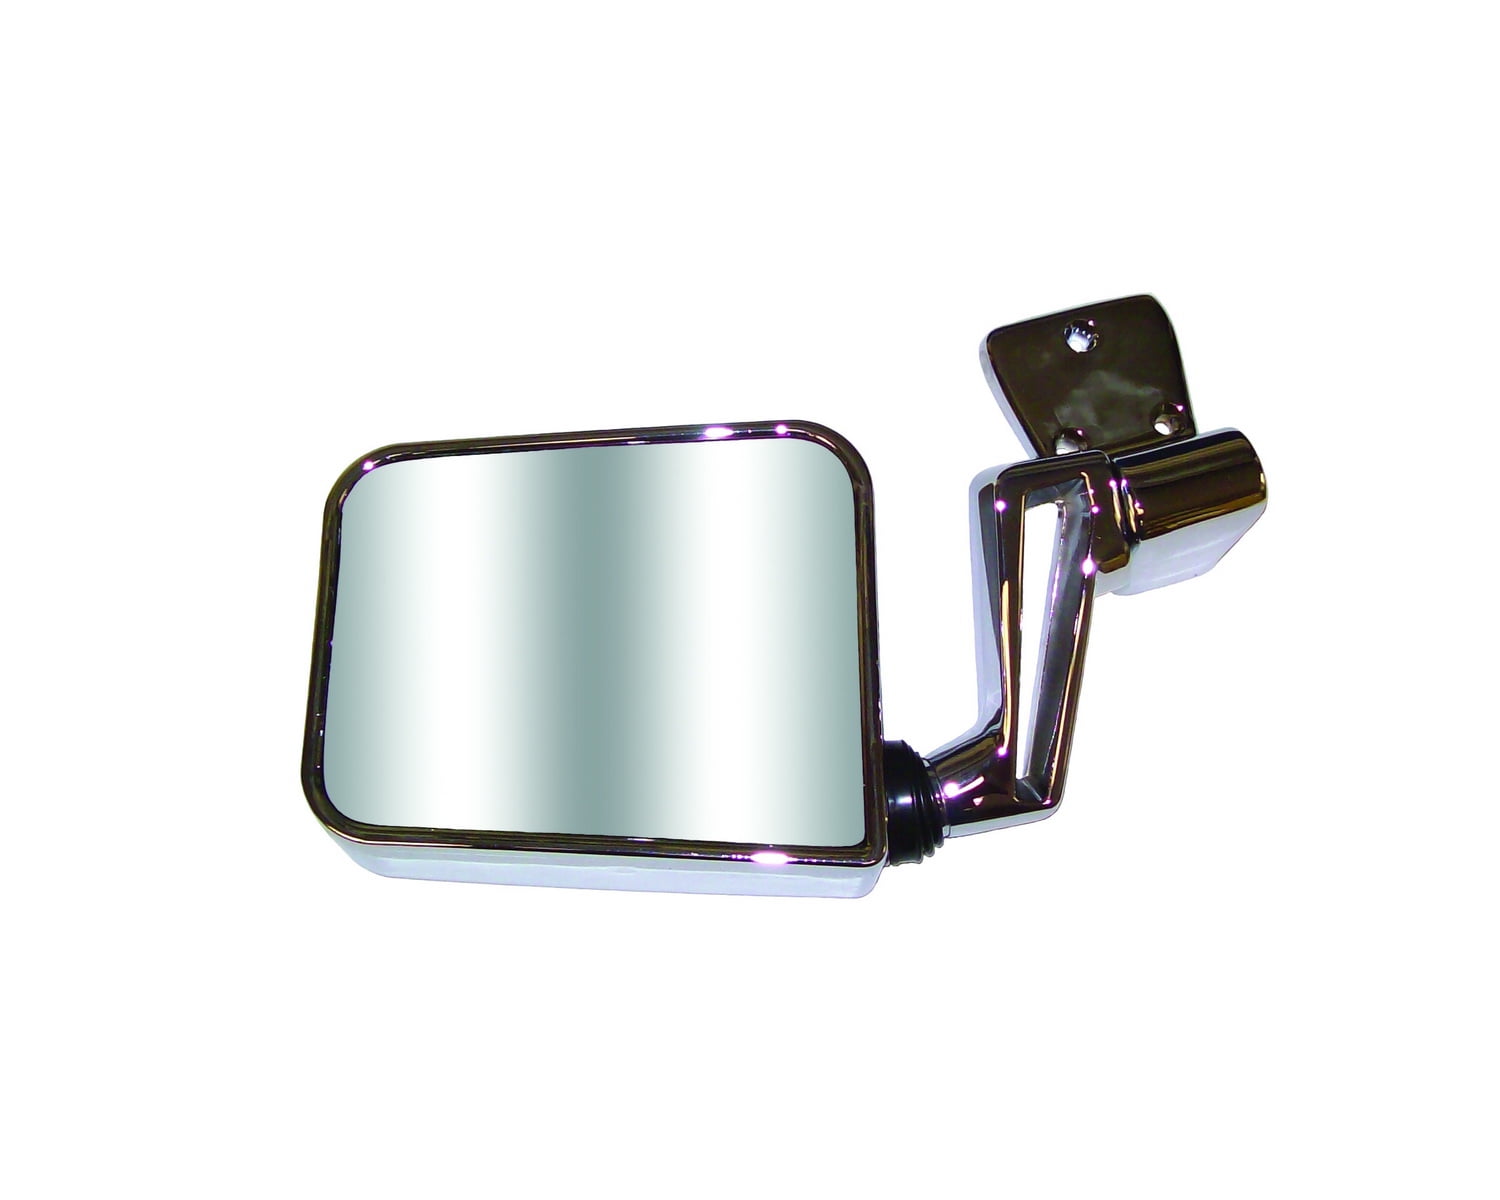 Original Style Replacement Mirror Jeep Driver Side Manual Foldaway Non-Heated Chrome